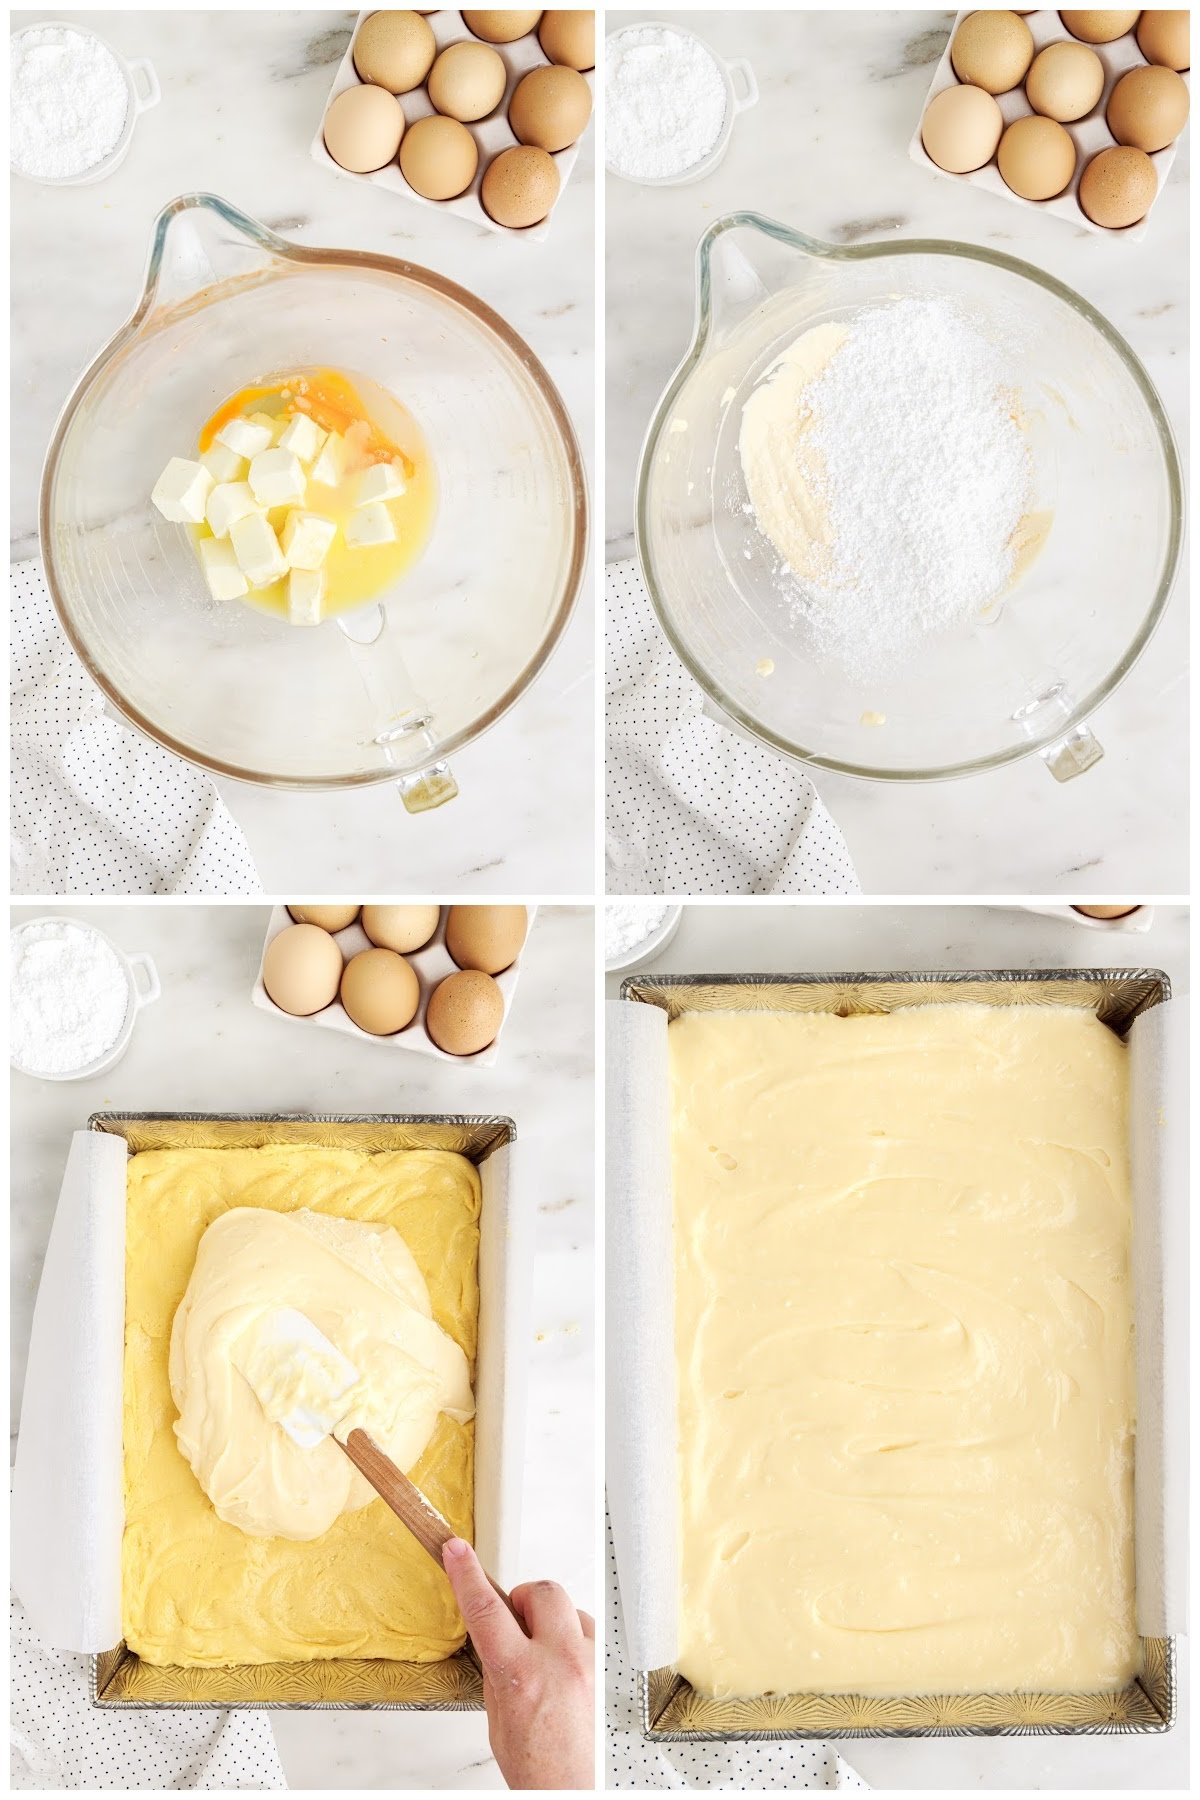 Four steps shown here for the making of the 2nd layer of the cake.